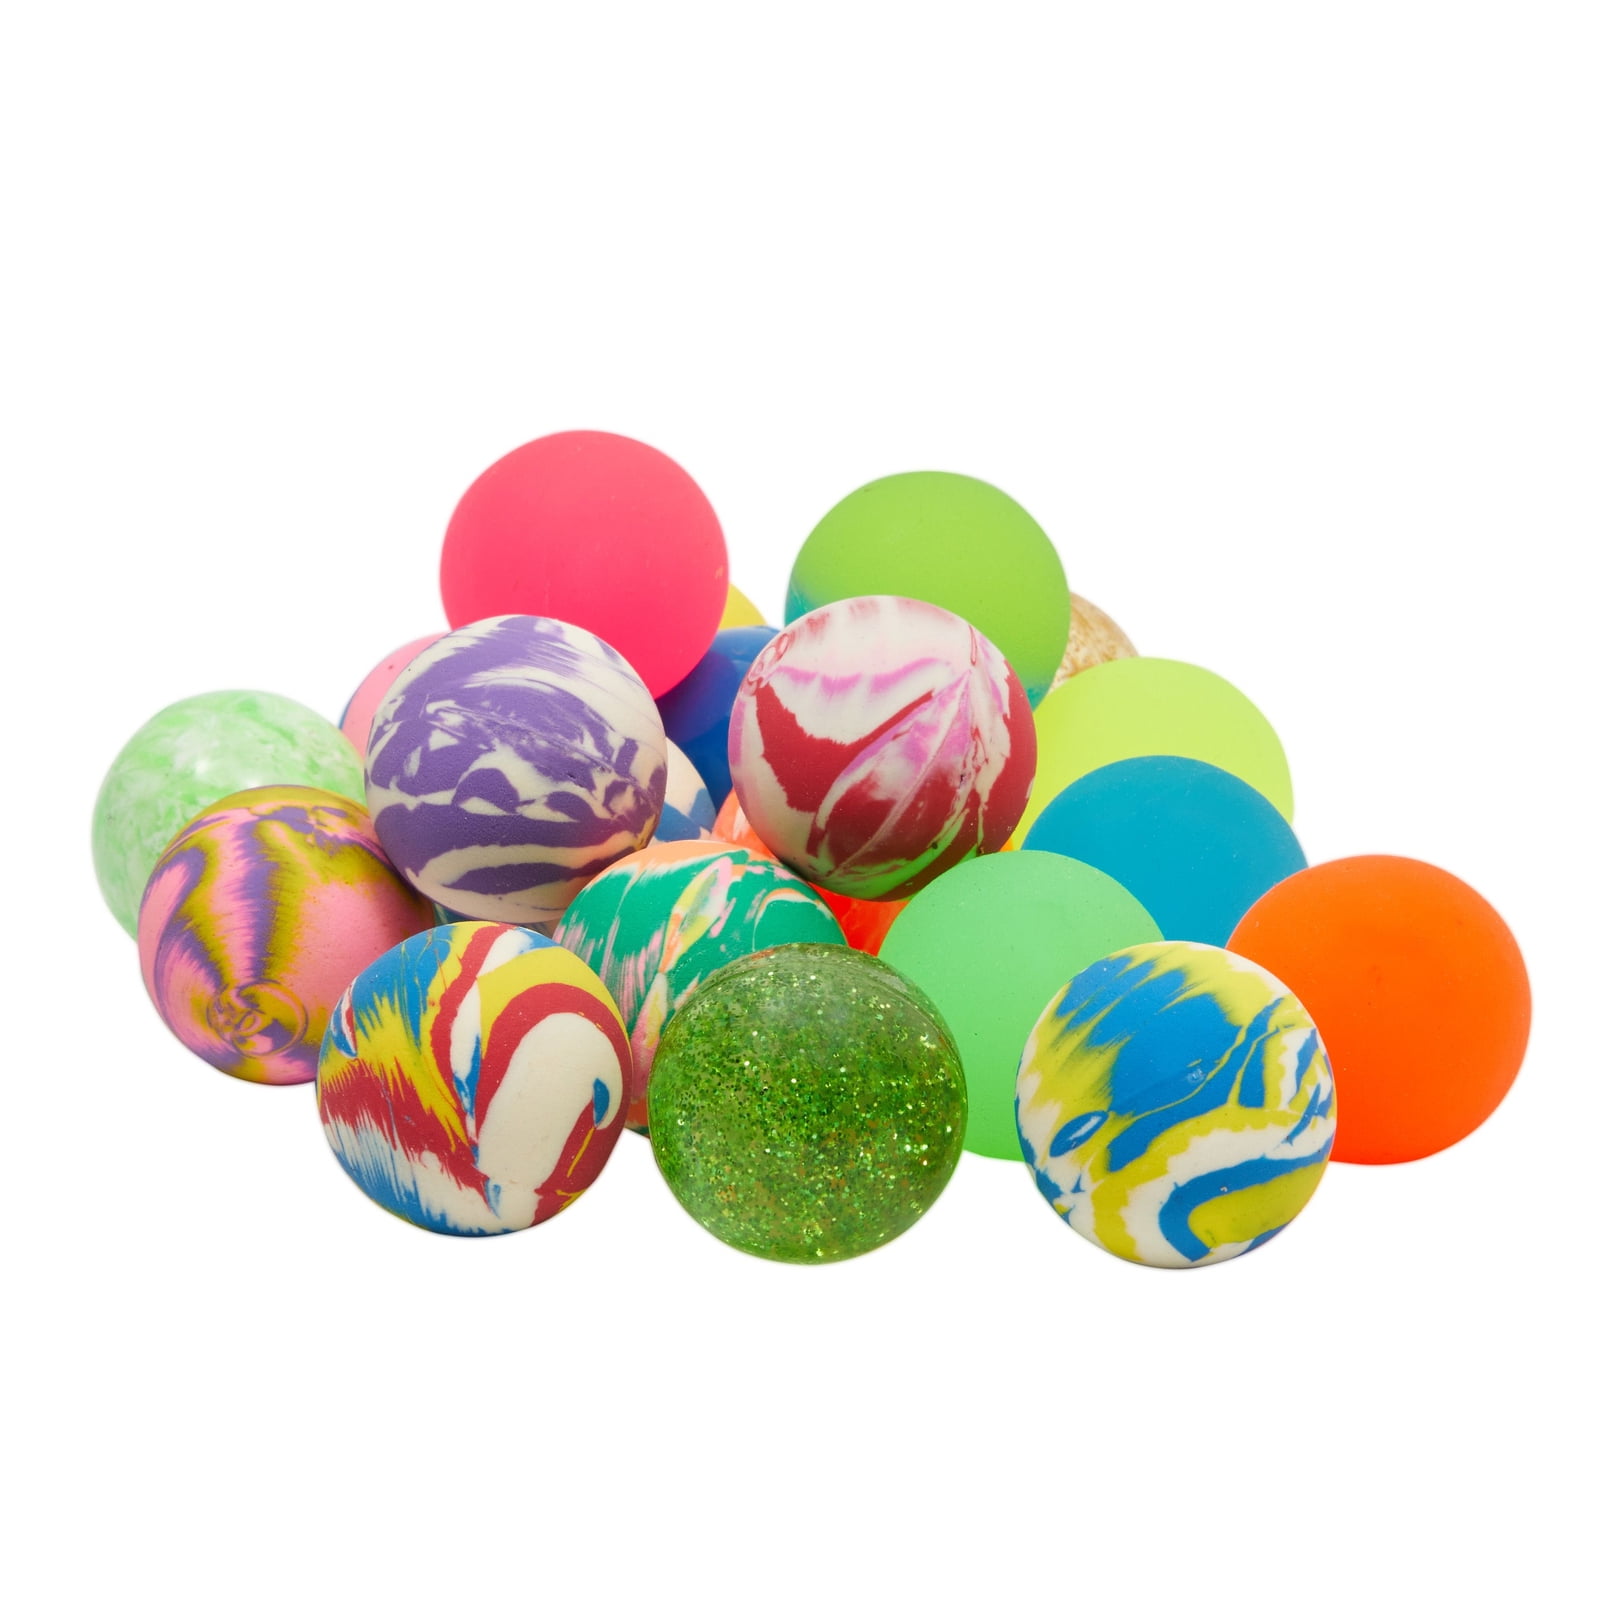 27mm, 32mm, 35mm, 45mm Birthdays Gift Prizes Pllieay 16 Pack Assorted Colorful Bouncy Balls 4 Kinds and 4 Sizes Bulk Mixed High Bouncing Balls For Kids Party Favors 